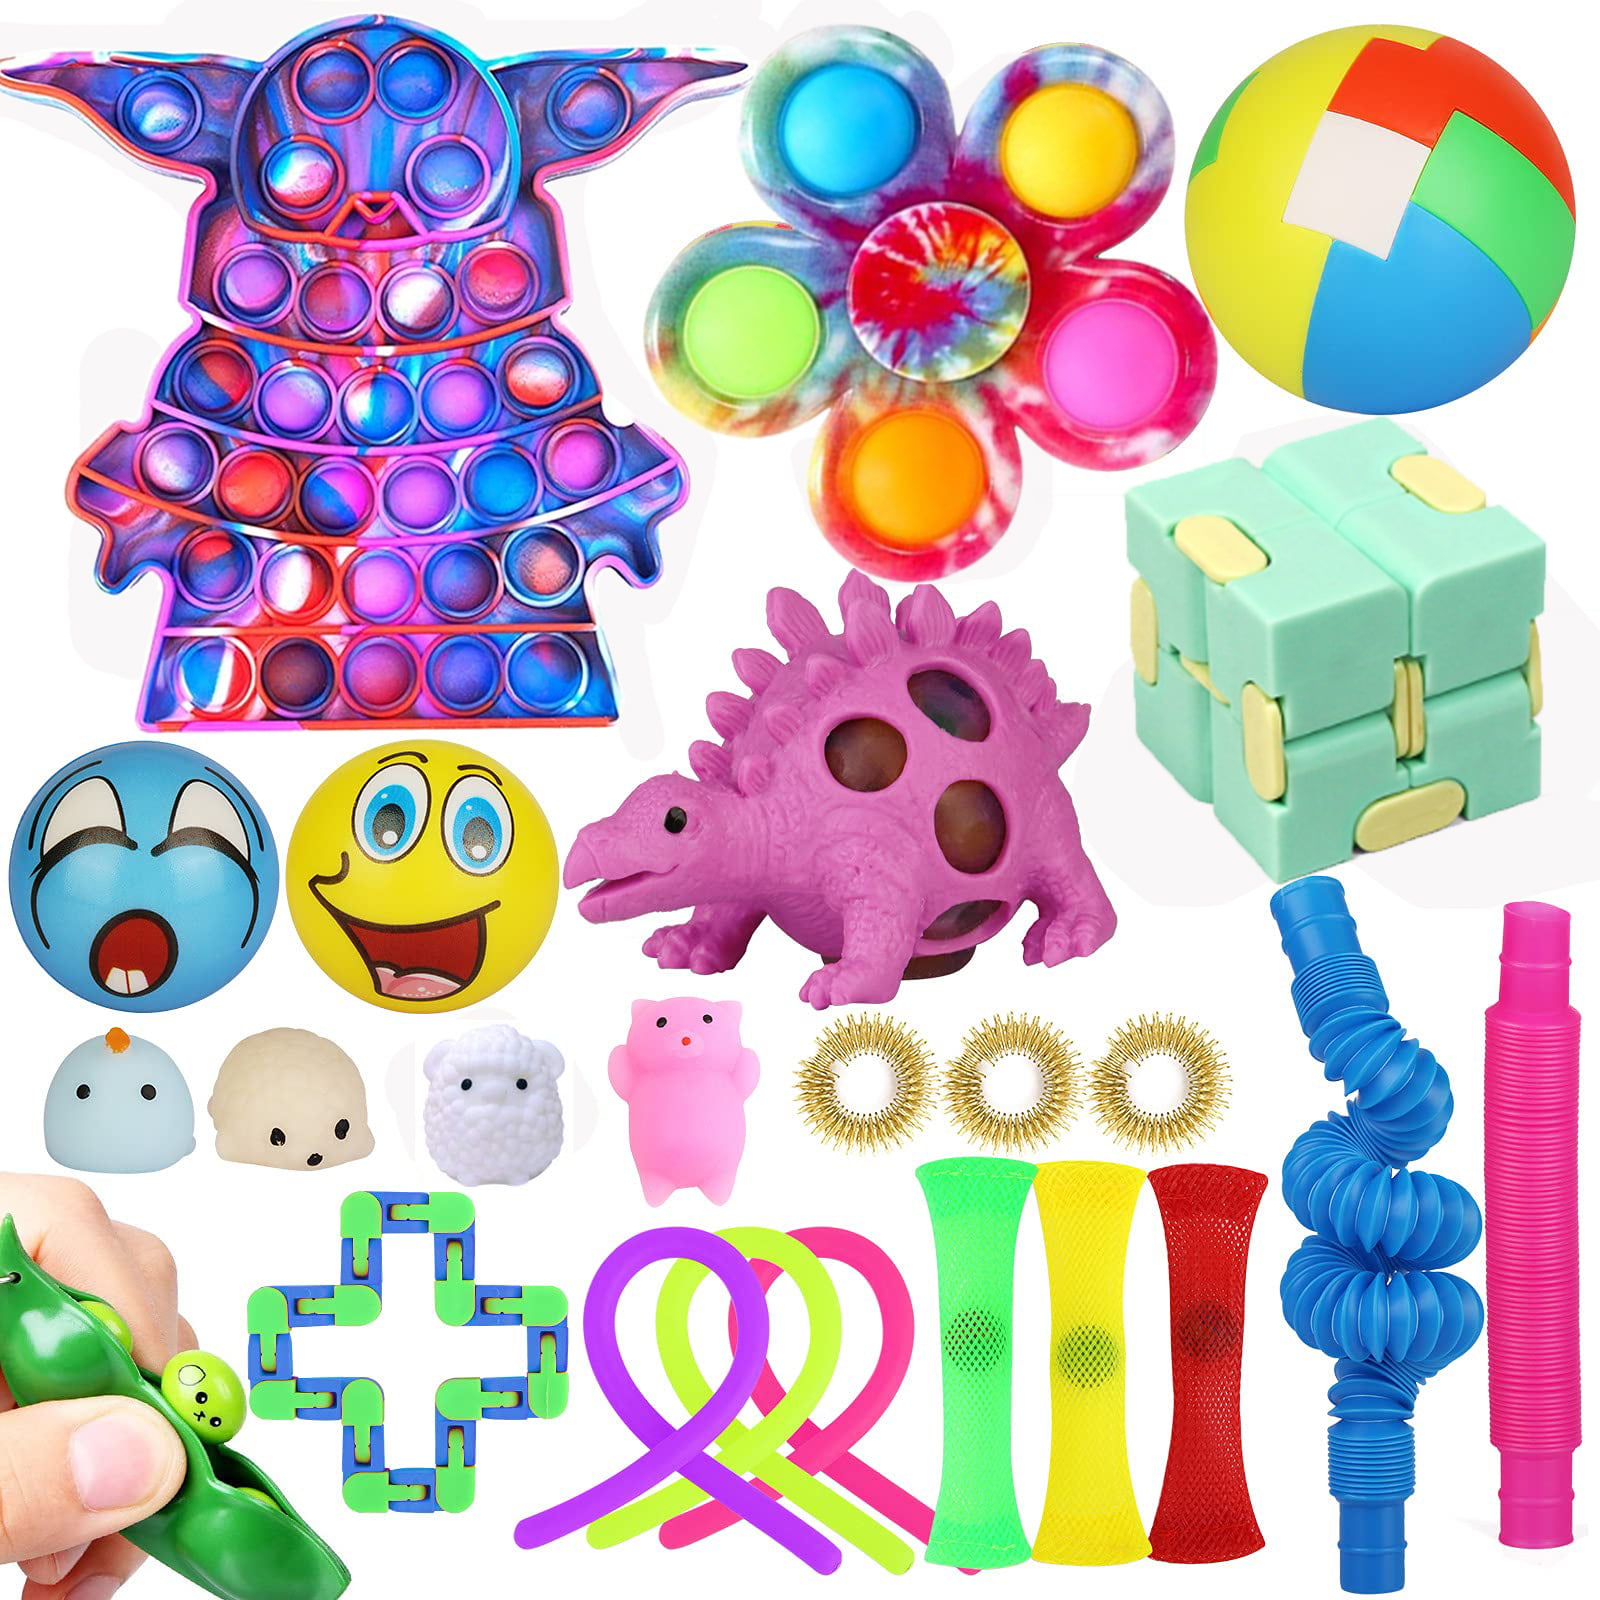 Details about   Fidget Sensory Toys For Stress Relief Anti-Anxiety Children's Vent Toys W3J4 